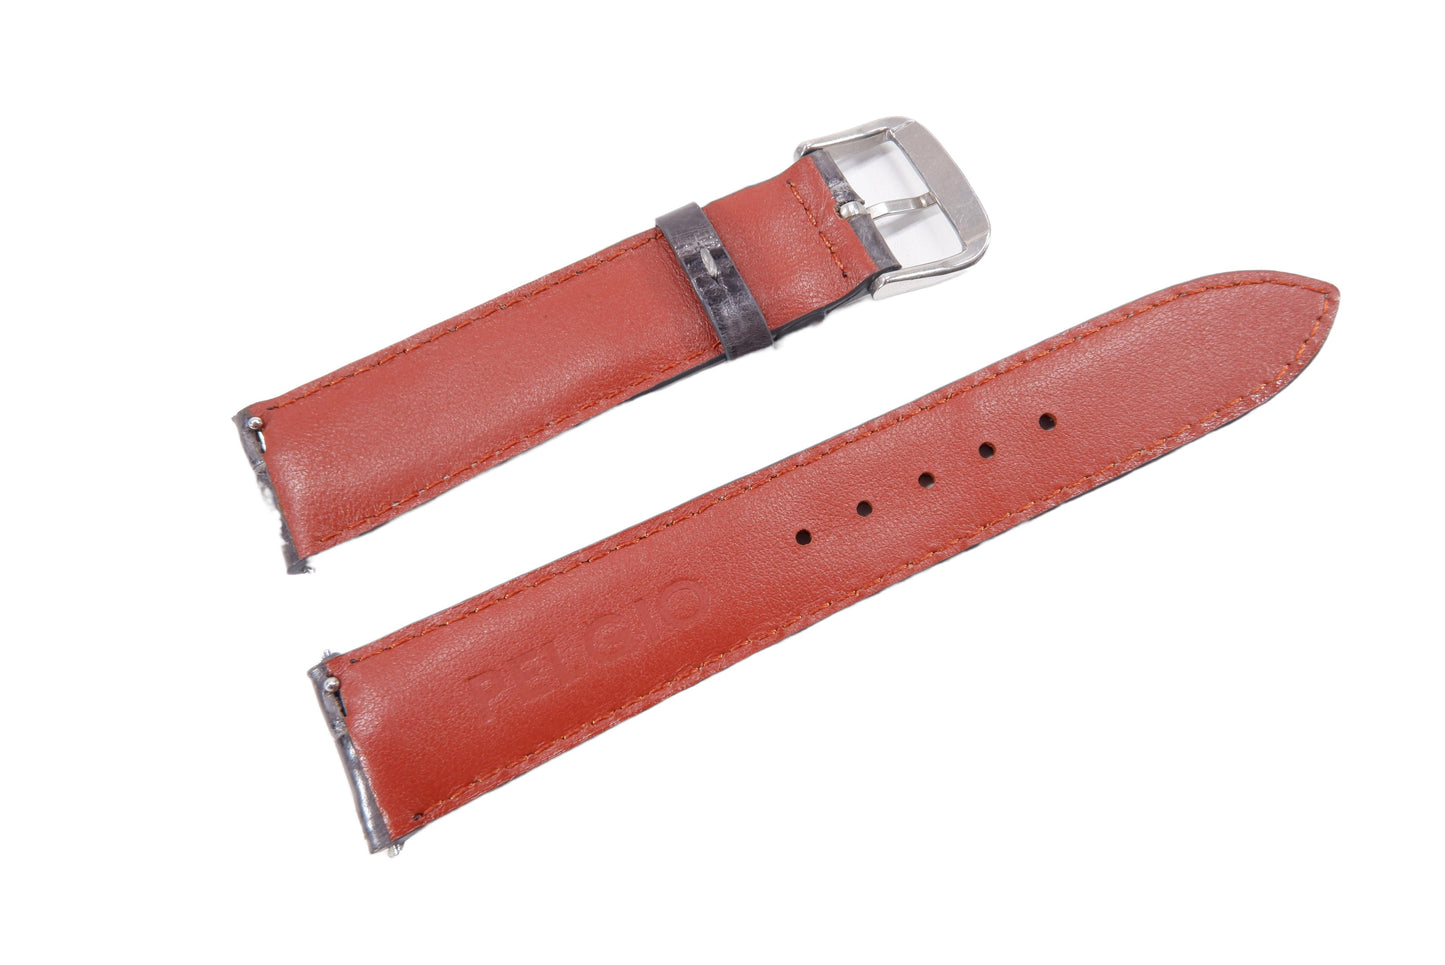 Genuine Crocodile Belly Skin Leather Quick Release Watch Strap Grey Band with Buckle